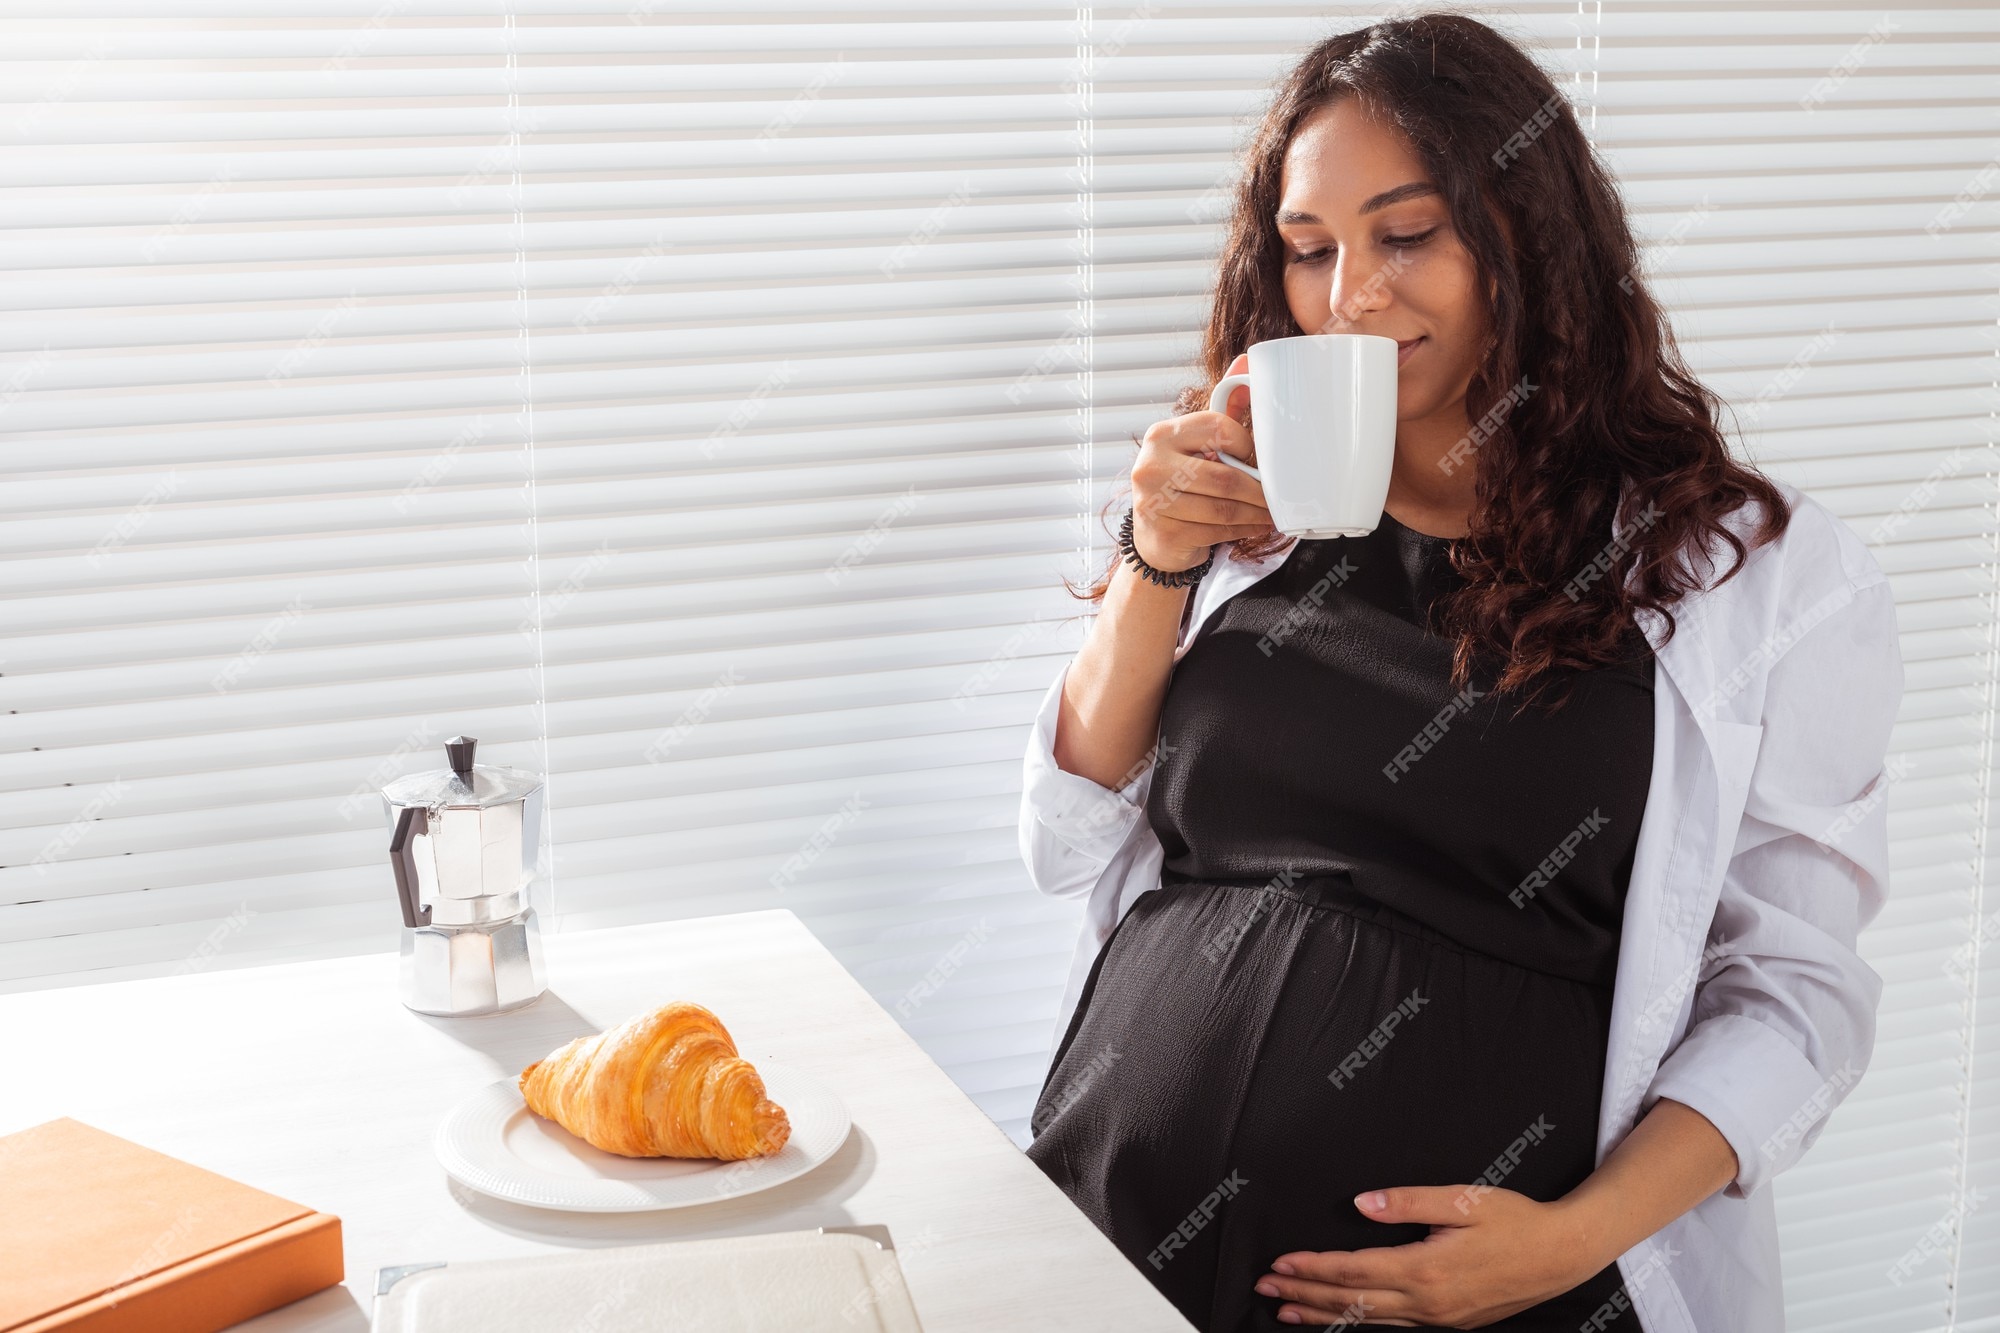 Premium Photo | Pregnant woman eating breakfast. pregnancy and maternity  leave